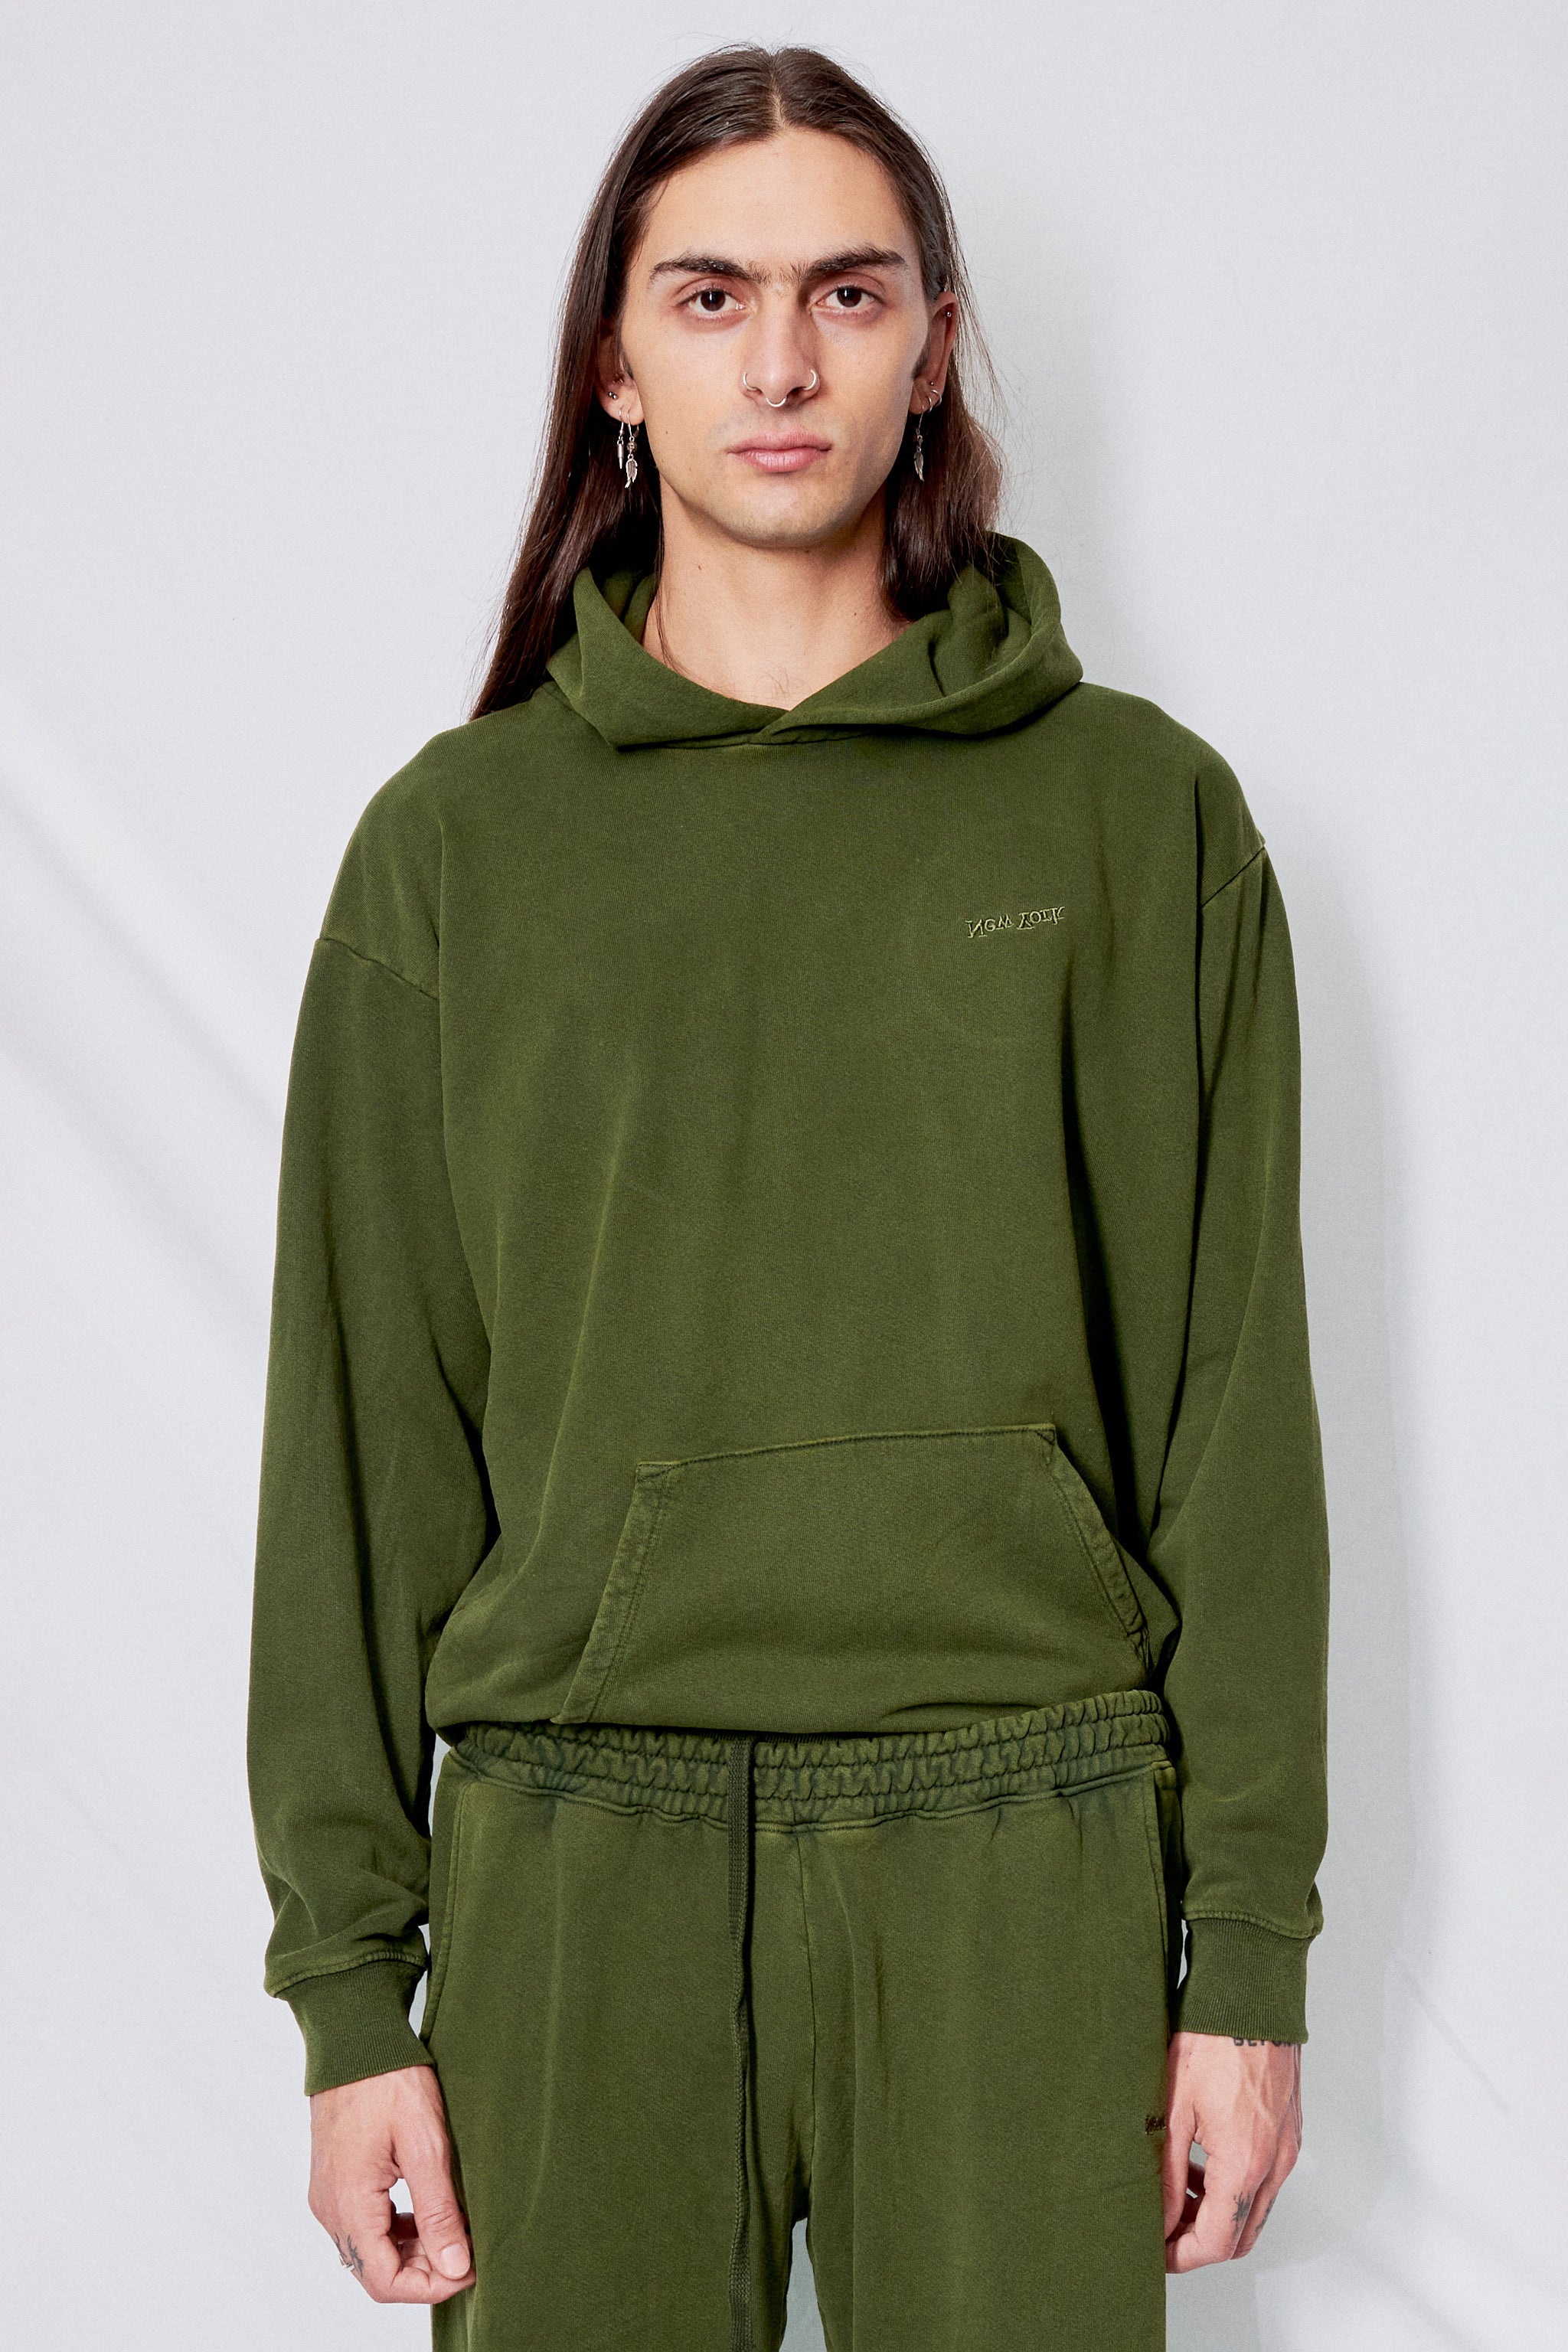 Forest Green Embroidered New York Chest Logo Hoodie